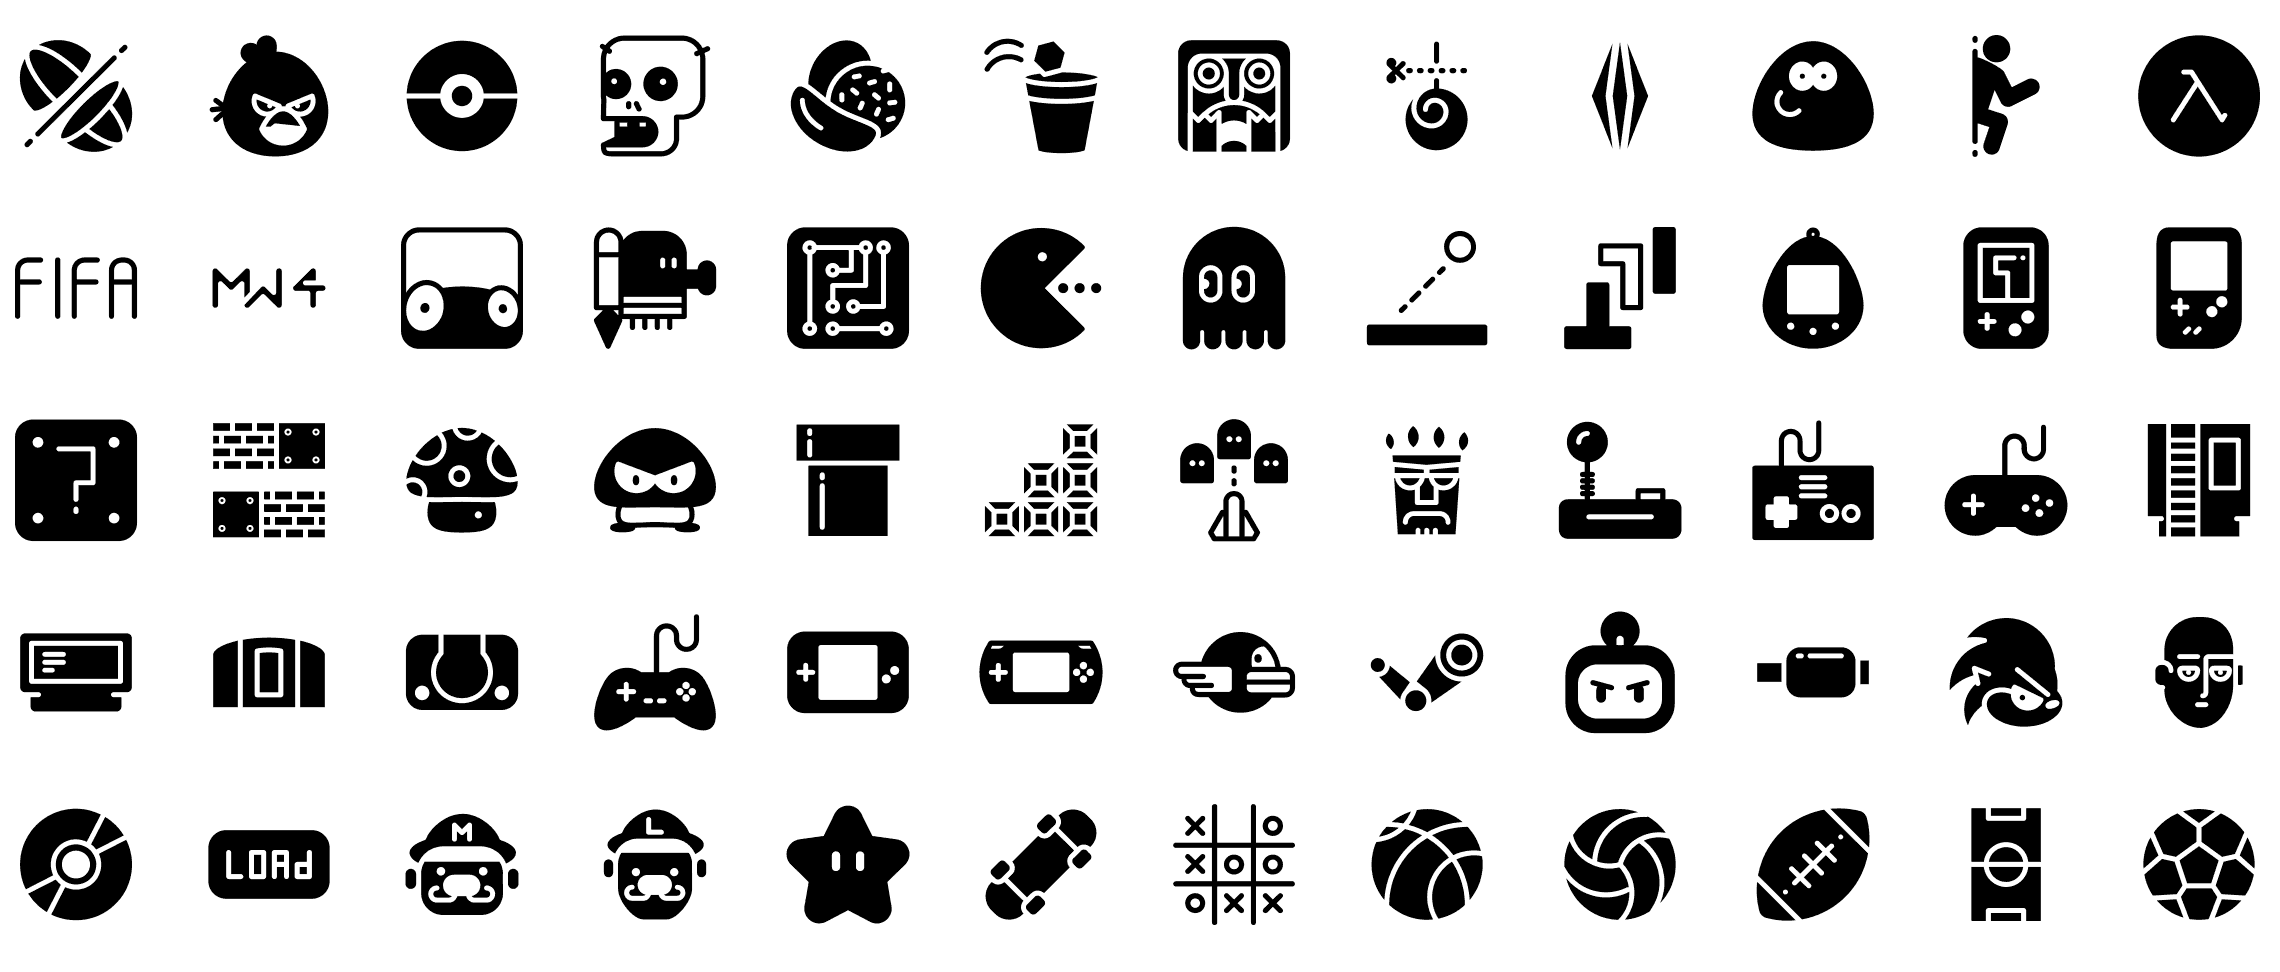 games-glyph-icons-preview